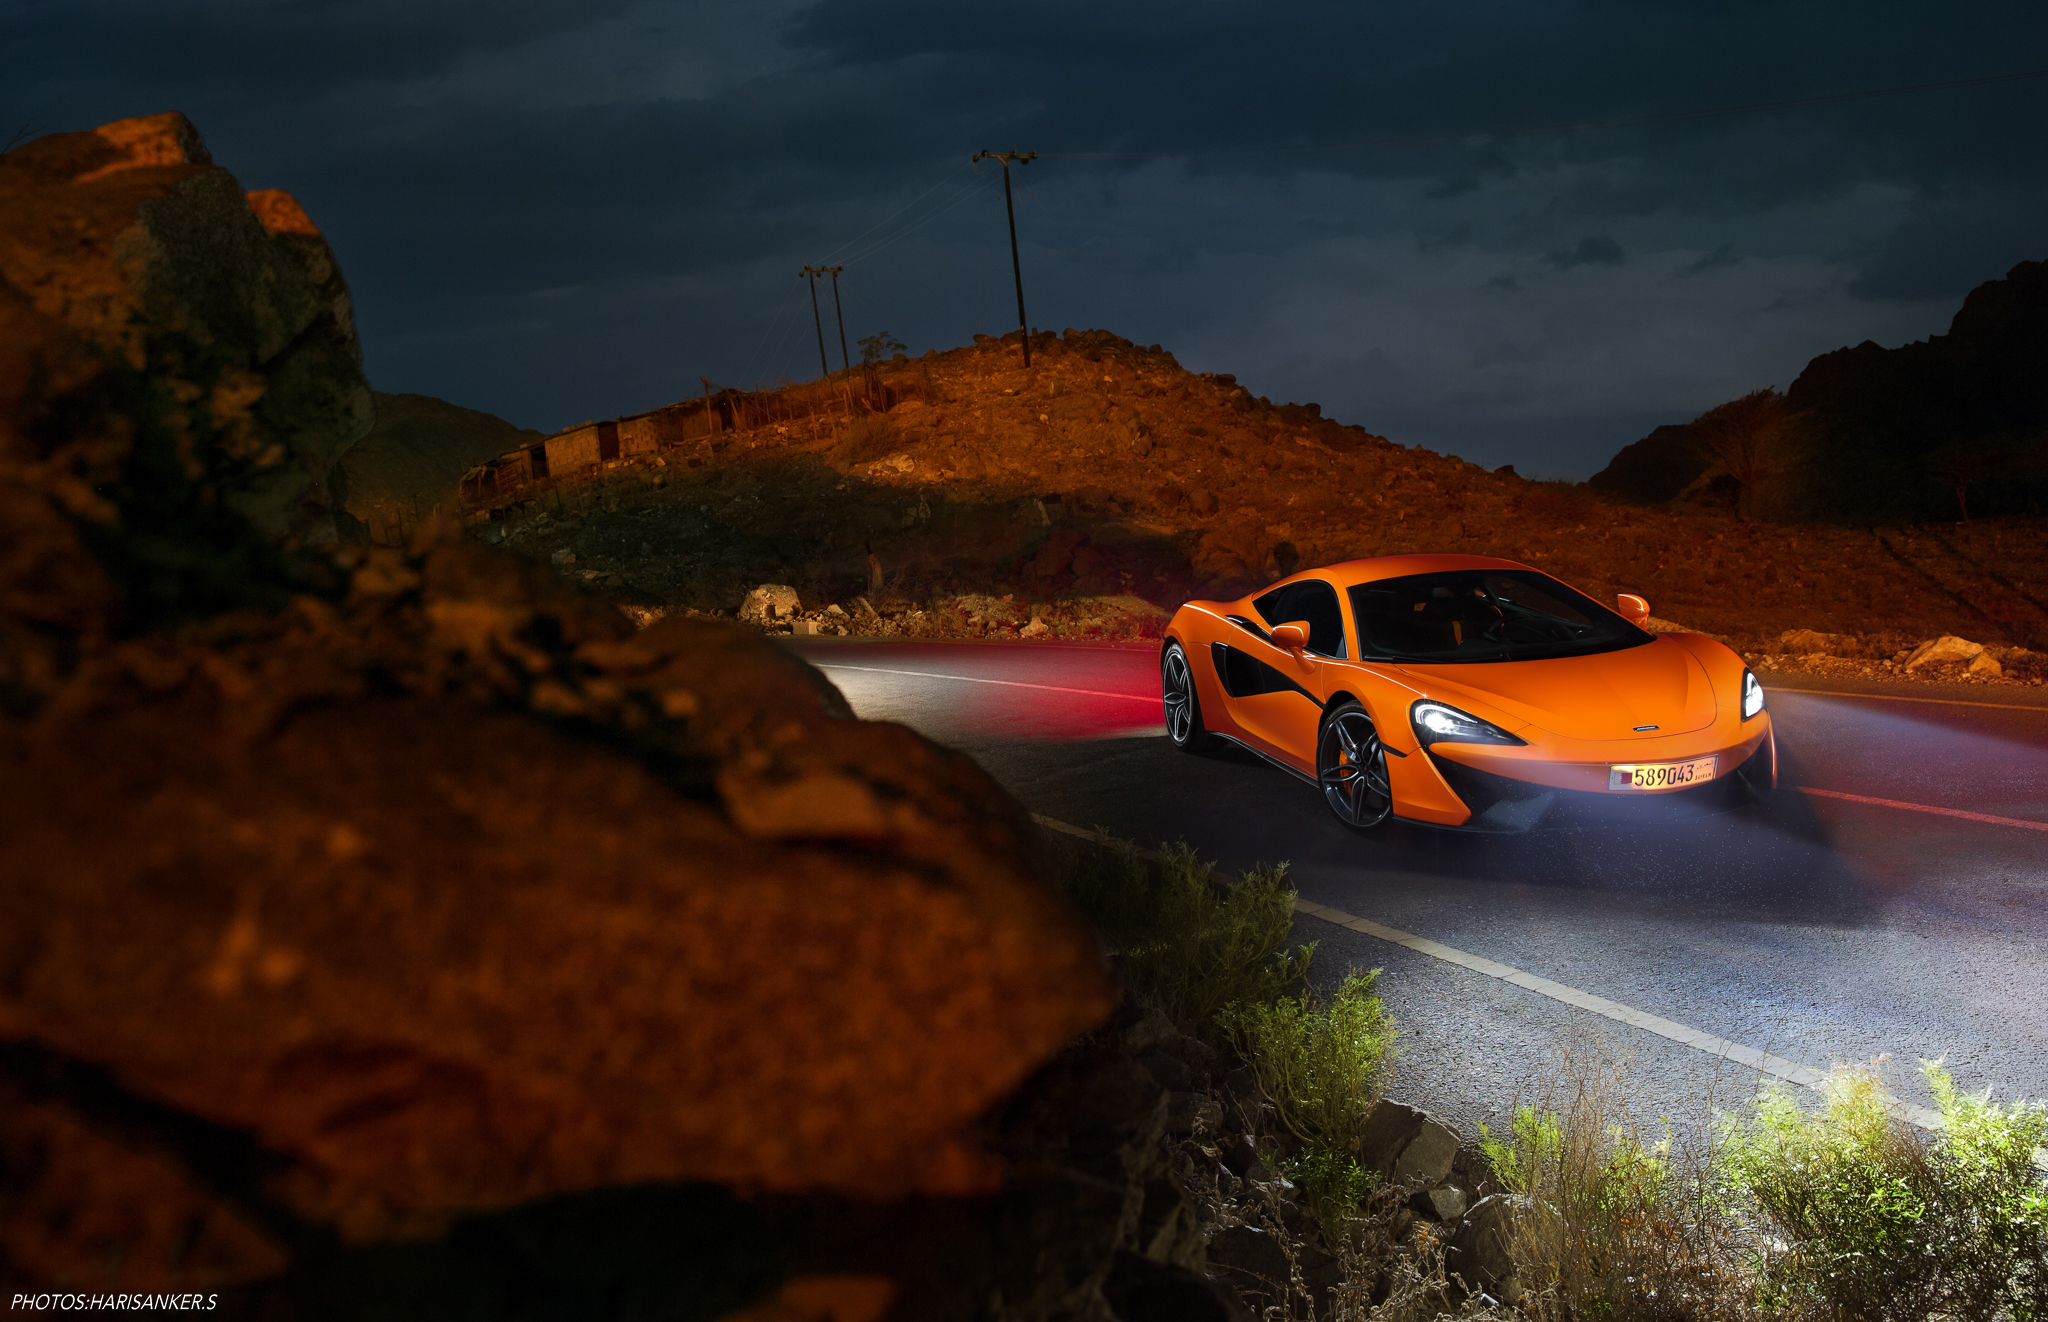 An orange-colored Mclaren on the road at night.